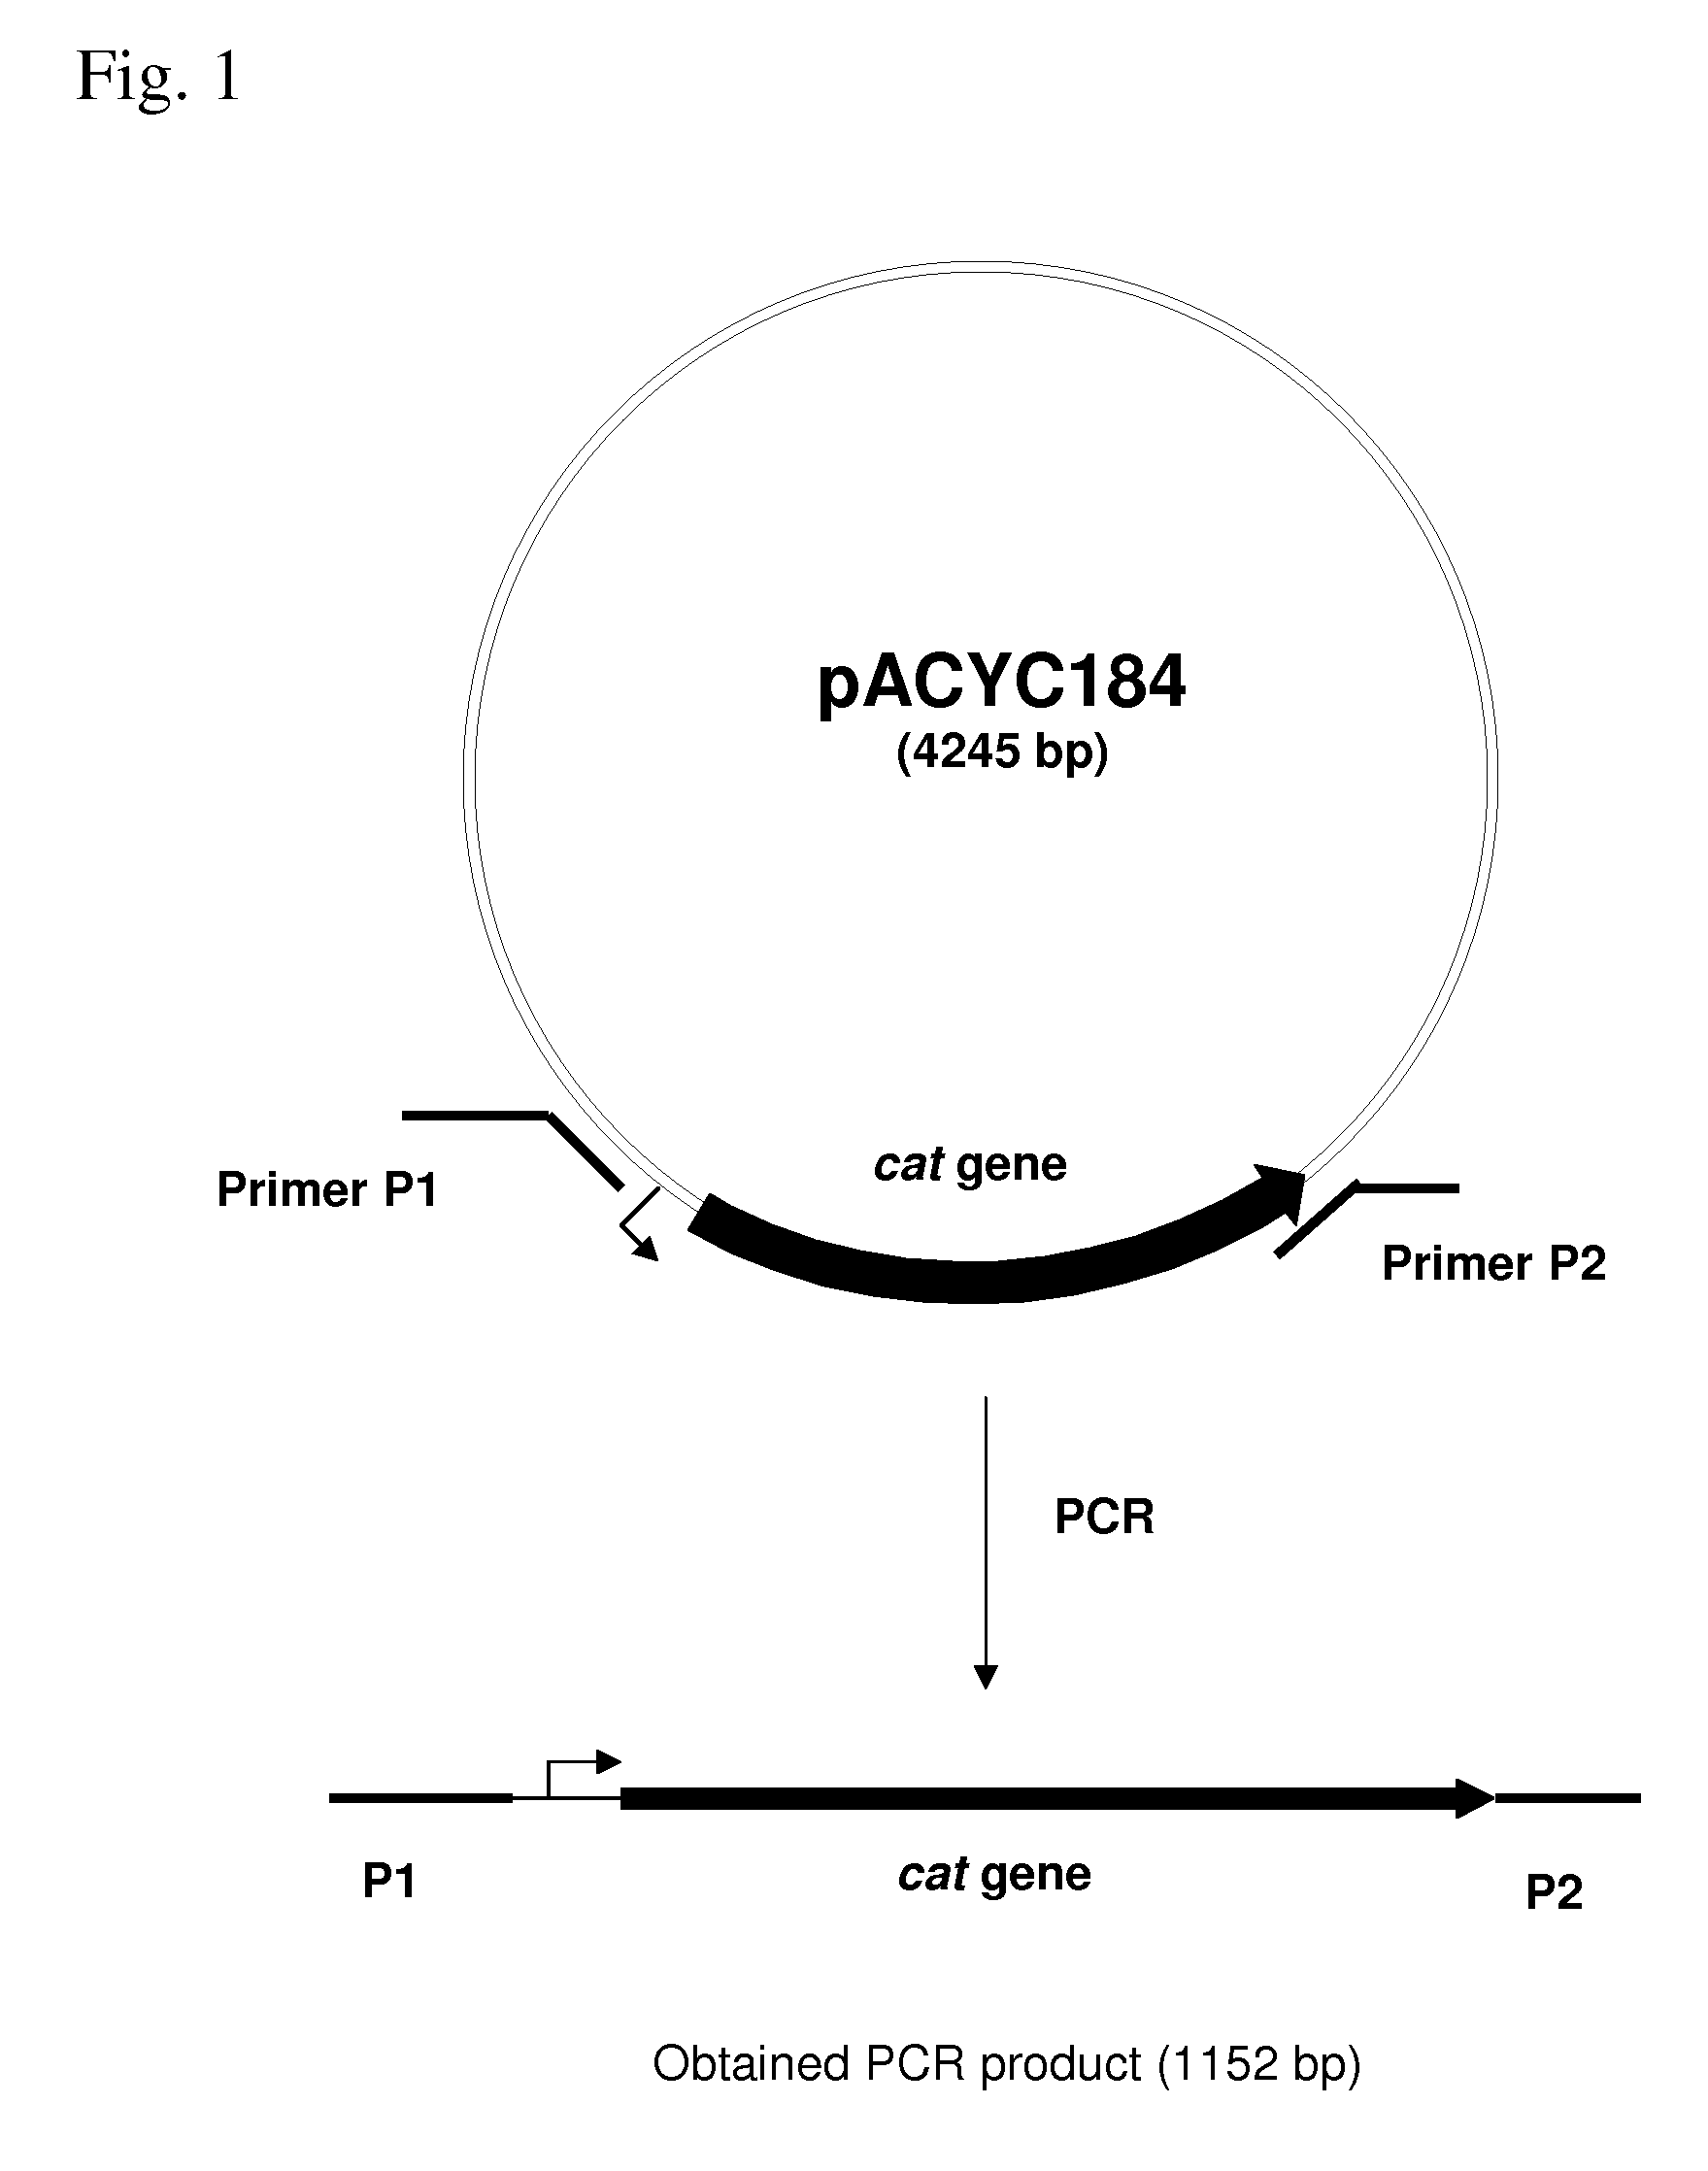 METHOD FOR PRODUCING AN L-AMINO ACID USING A BACTERIUM OF THE ENTEROBACTERIACEAE FAMILY WITH ATTENUATED EXPRESSION OF THE rspAB OPERON